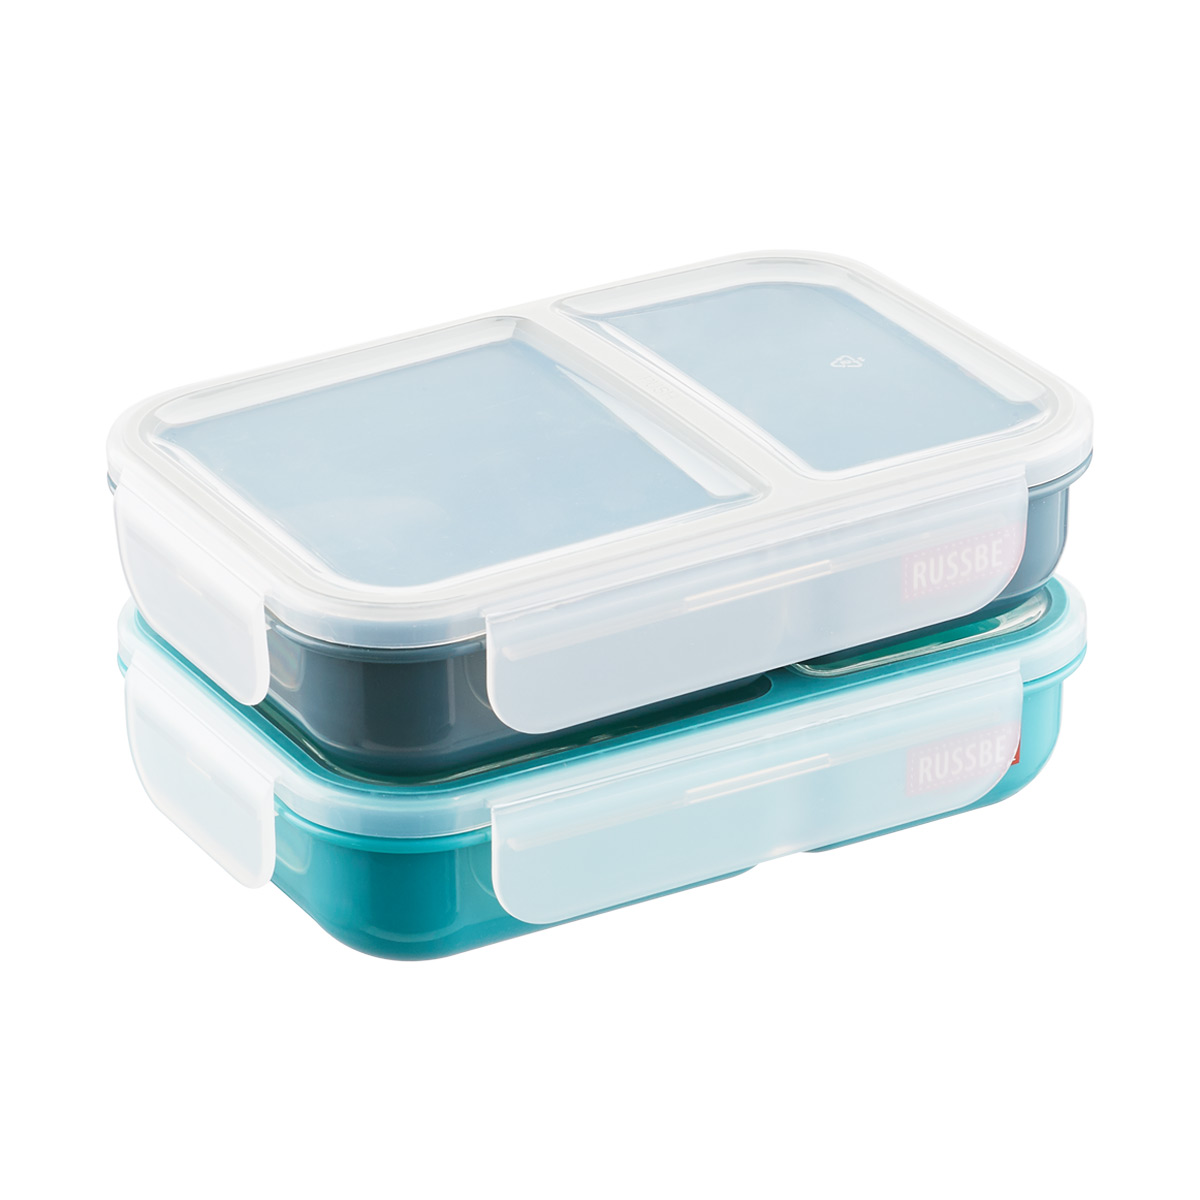 https://www.containerstore.com/catalogimages/347873/10075647g-23oz-2compartment-bento.jpg